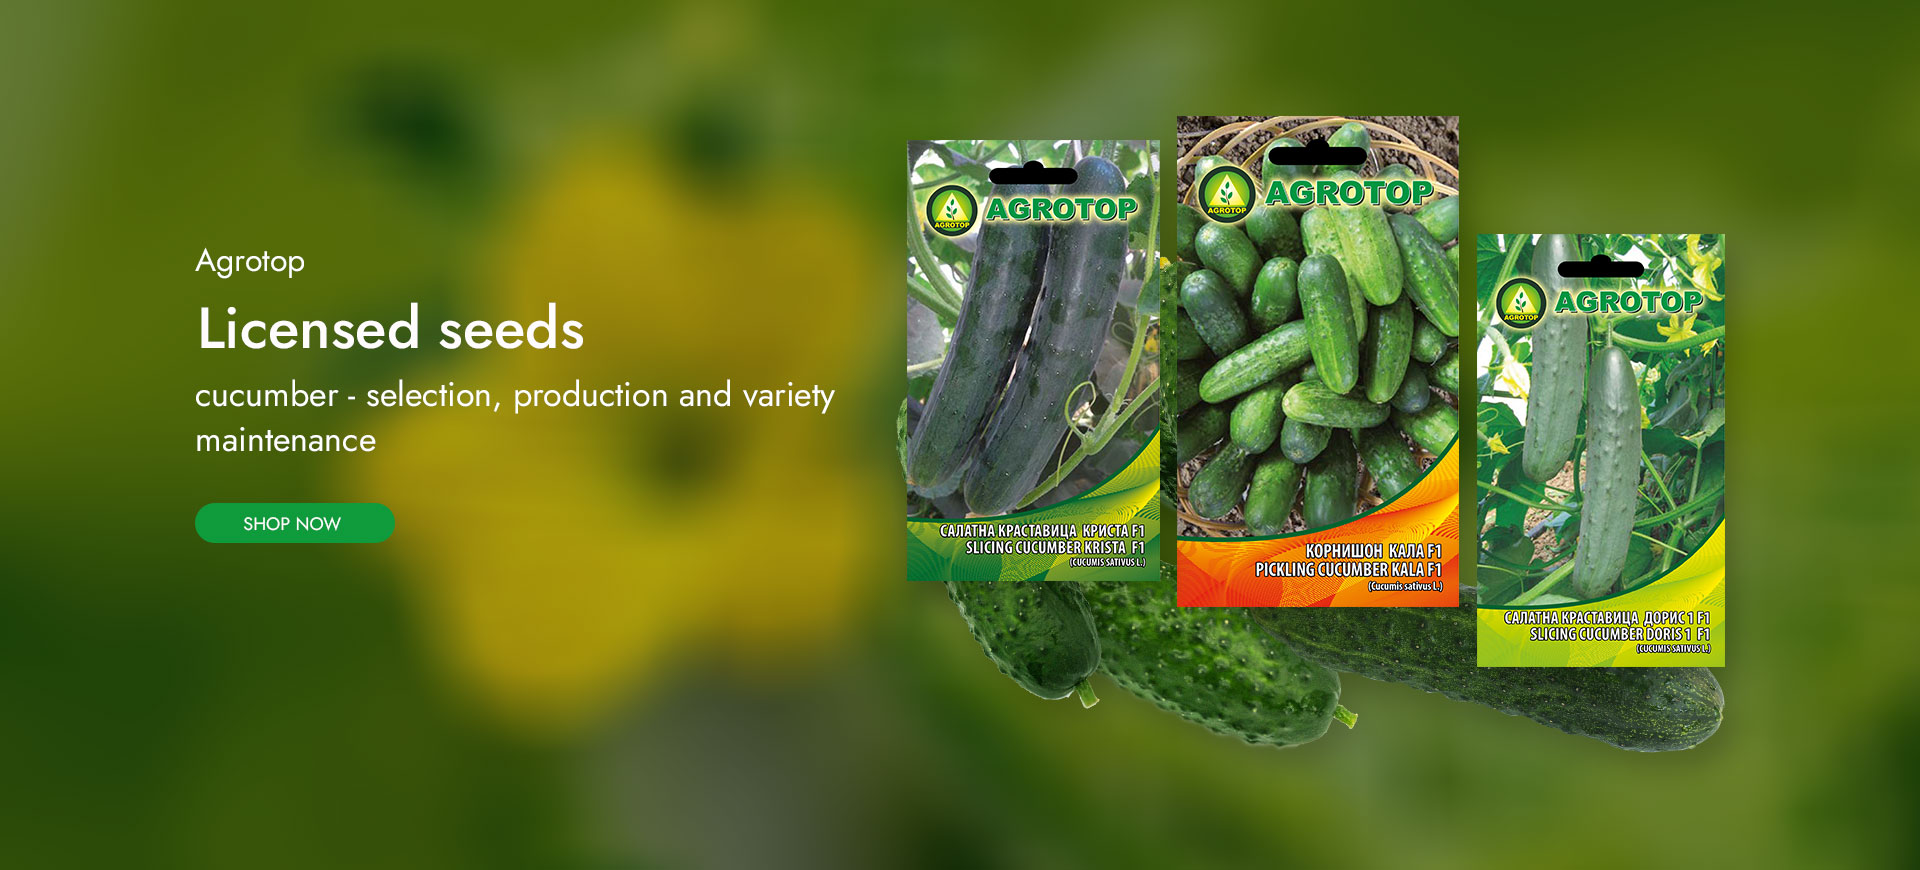 Cucumbers by Agrotop